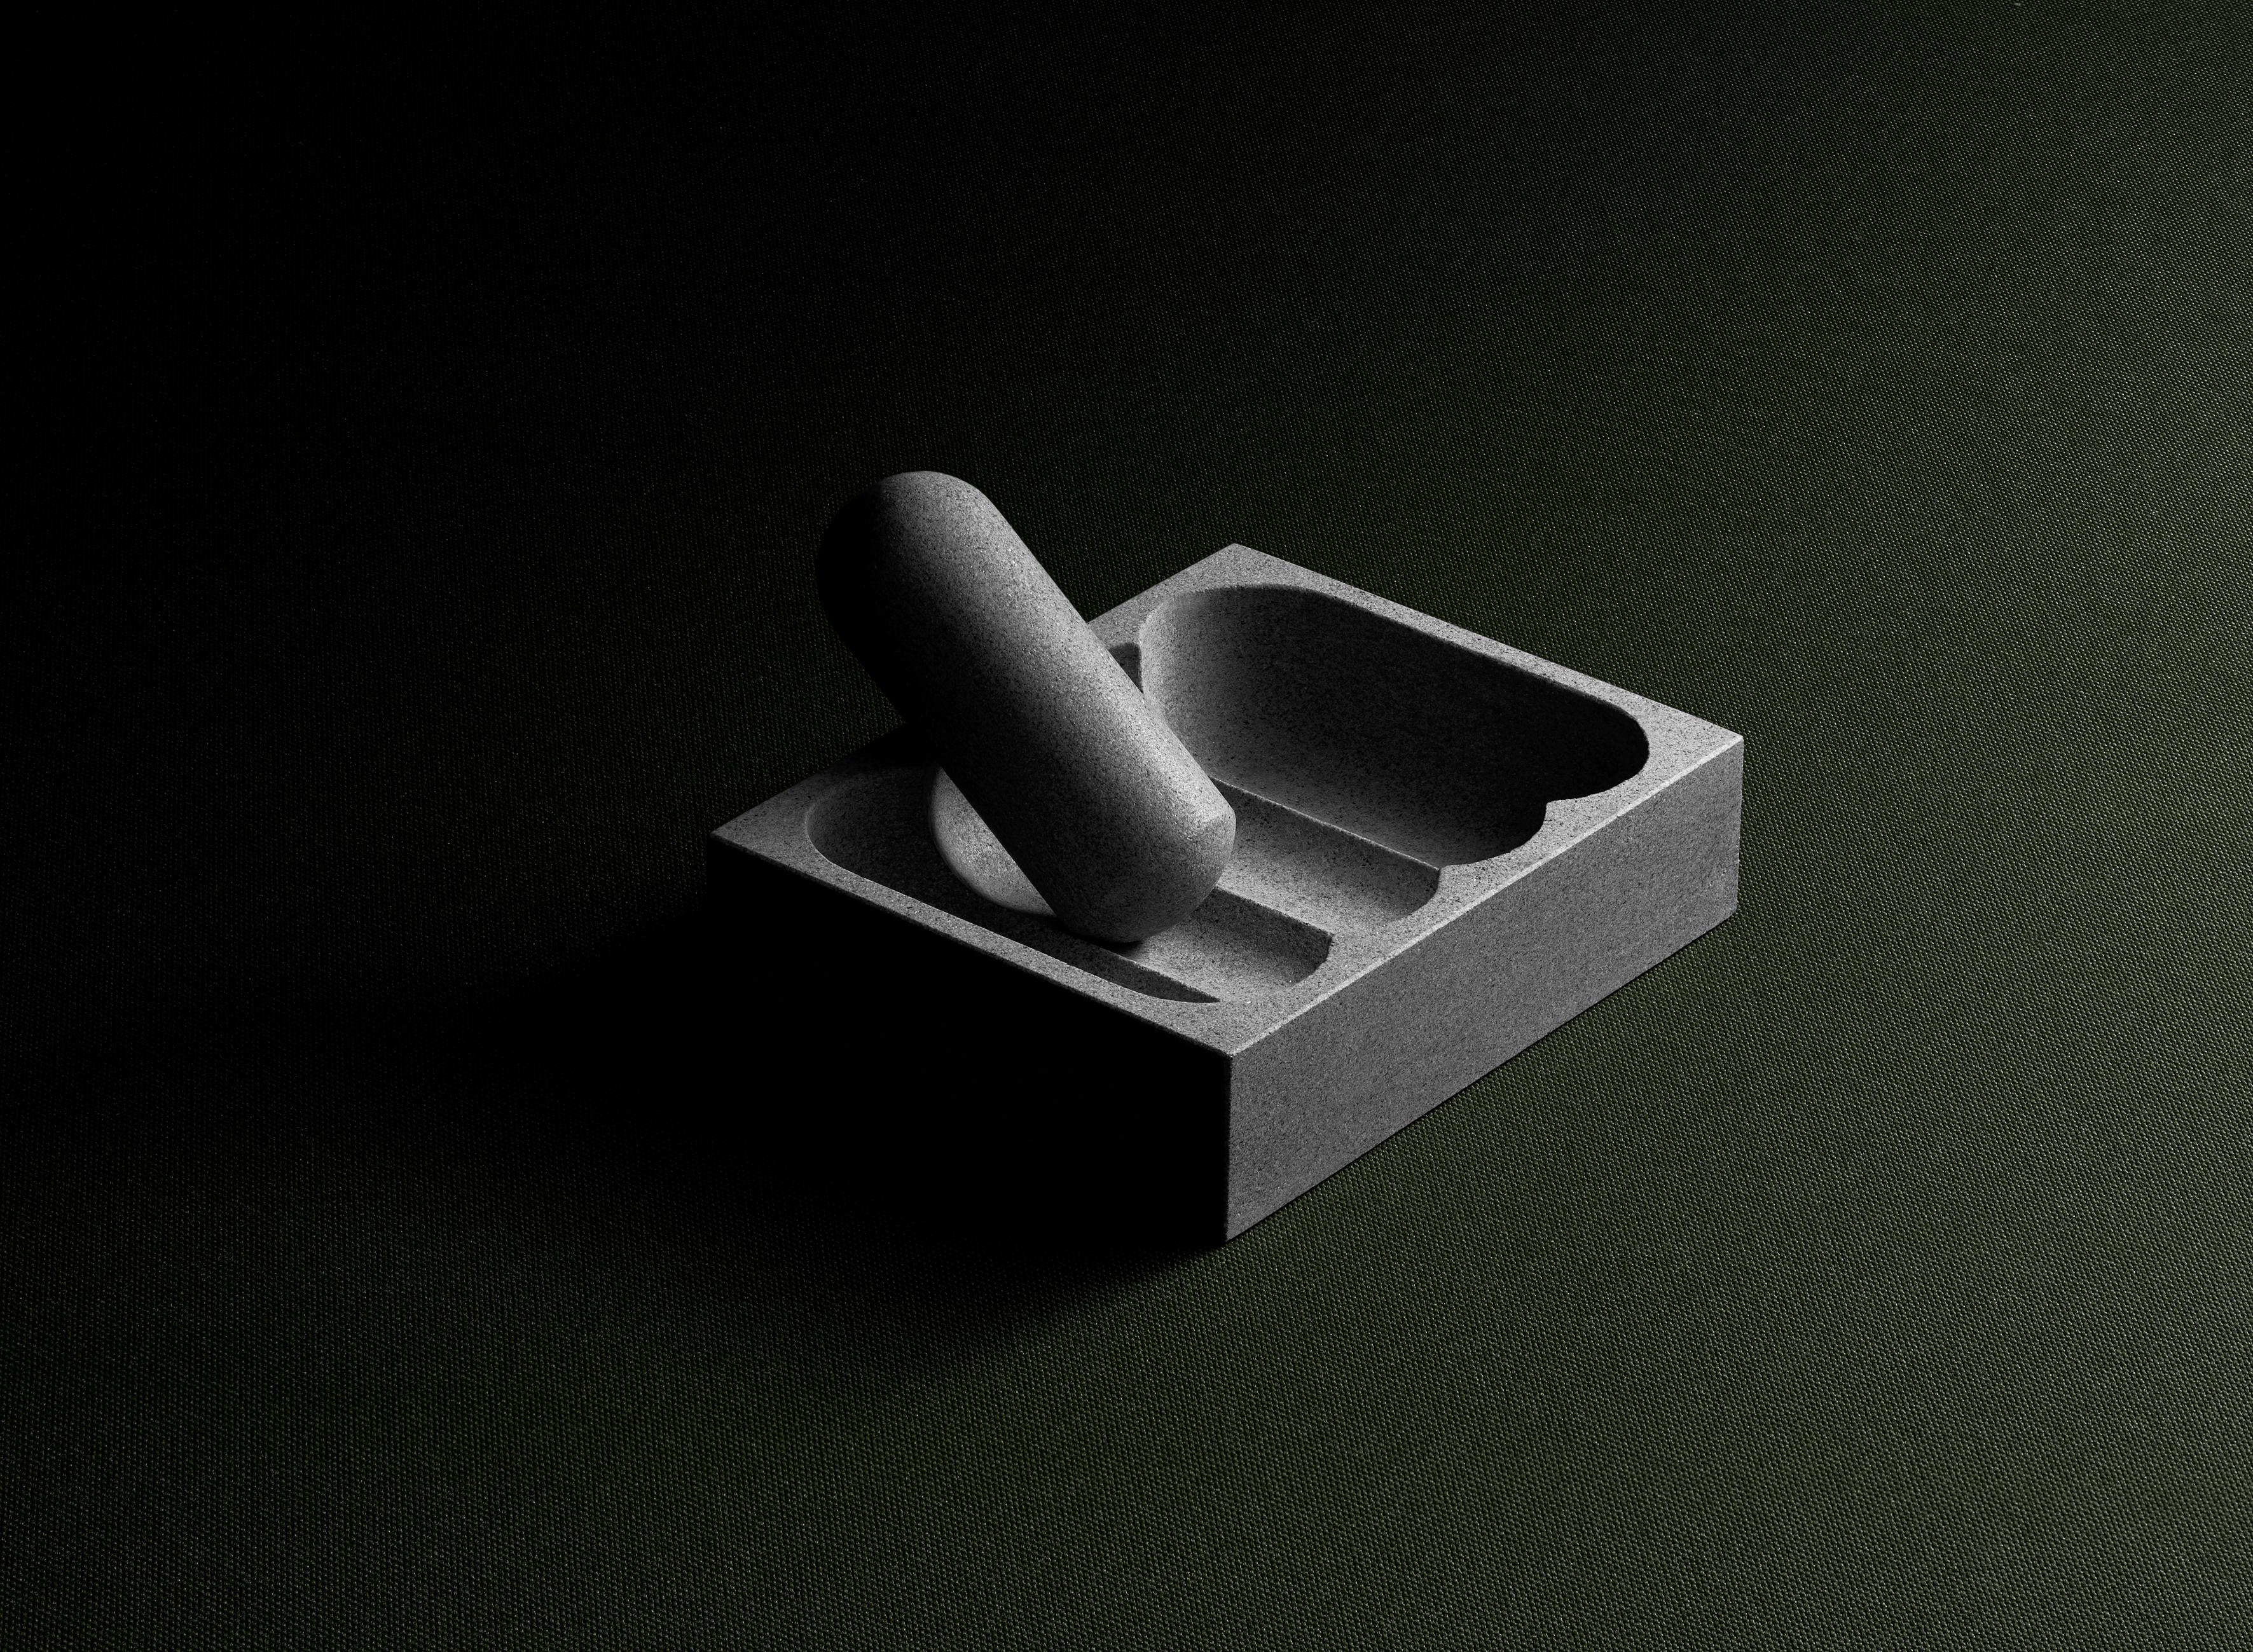 Pietra Serena Flure Mortar and Pestle by Tino Seubert
Dimensions: W 10 x D 12.6 x H 32 cm.
Materials: Pietra serena sandstone carved in Italy.
Also available in Rosso Etrusco sandstone. 

Tino Seubert
When he first made his now signature